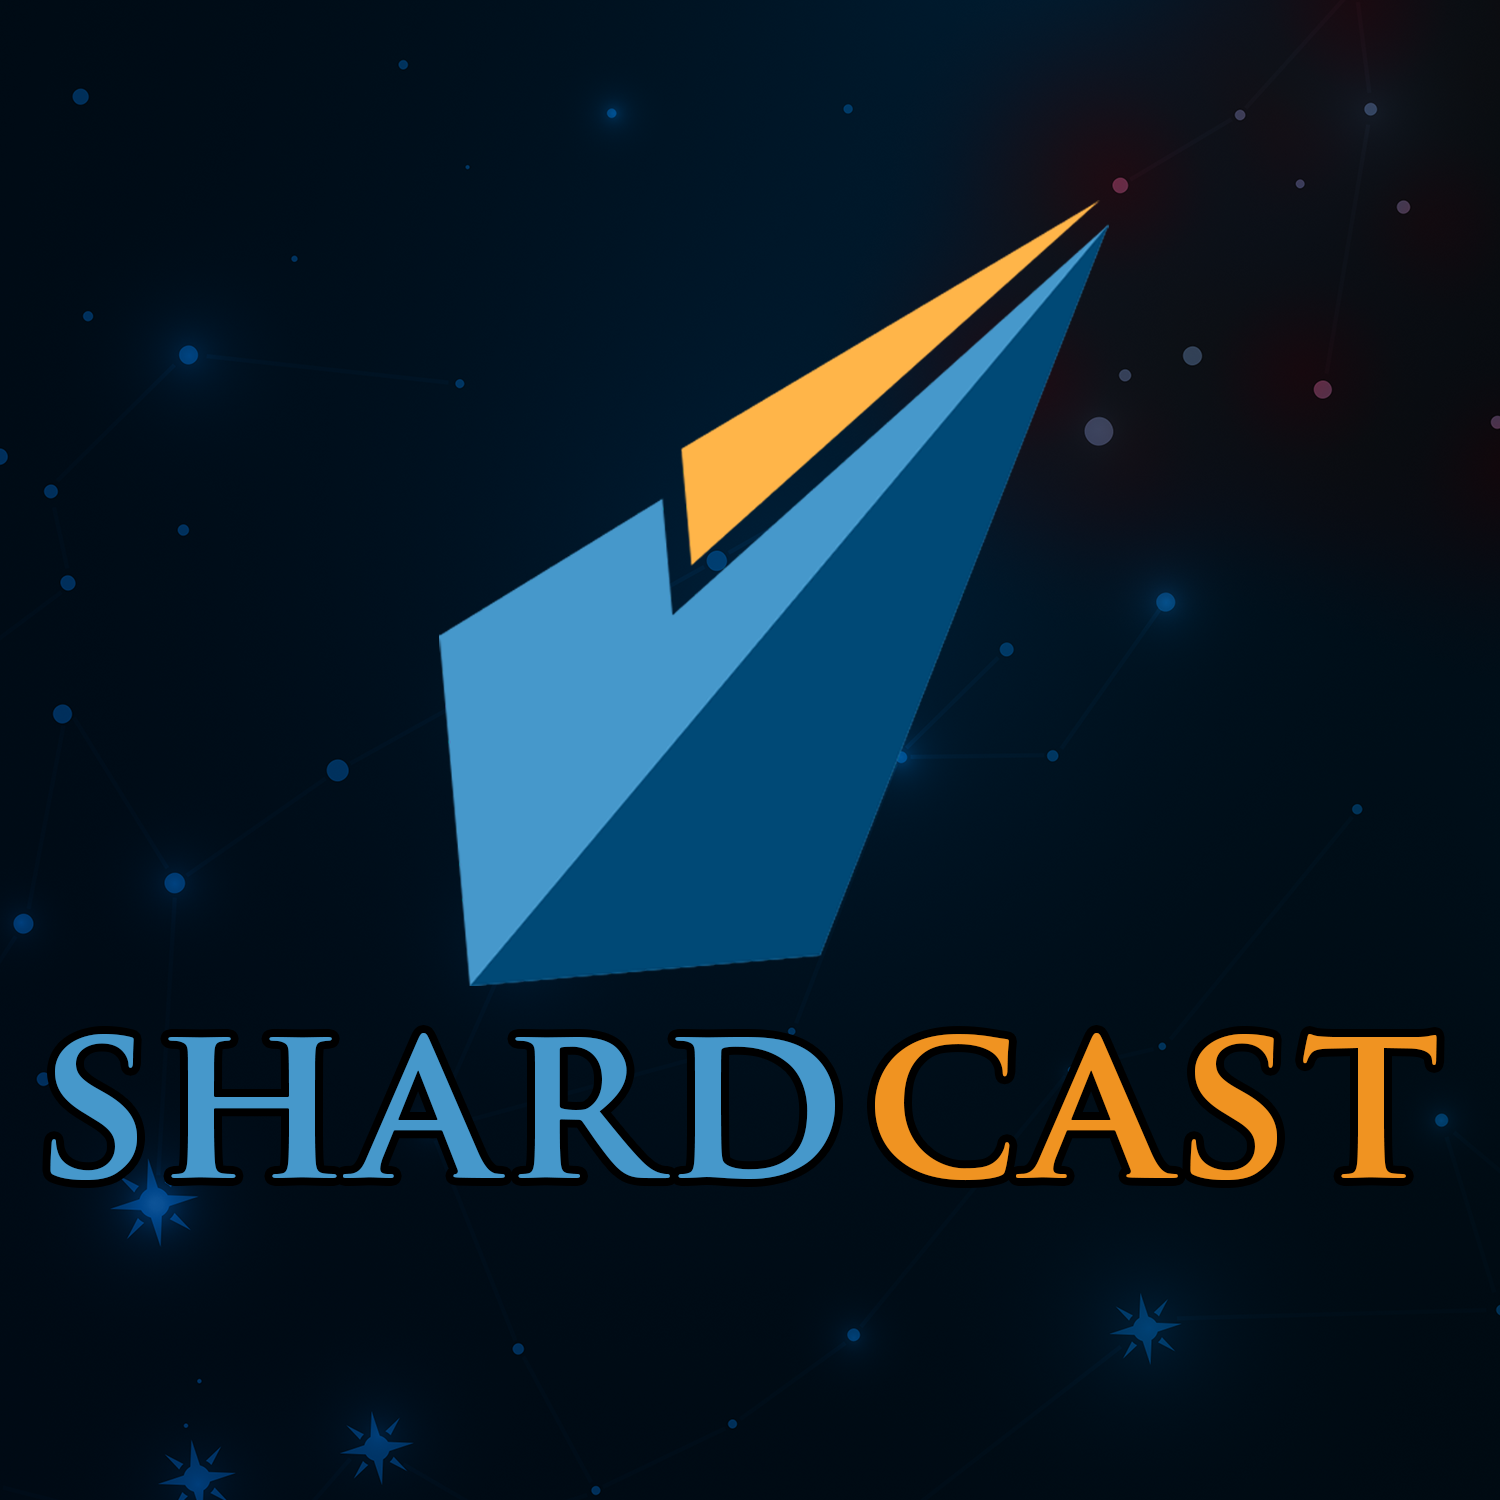 More information about "Shardcast: The Charred and the Torment - Sunlit Man Lore Part 1"